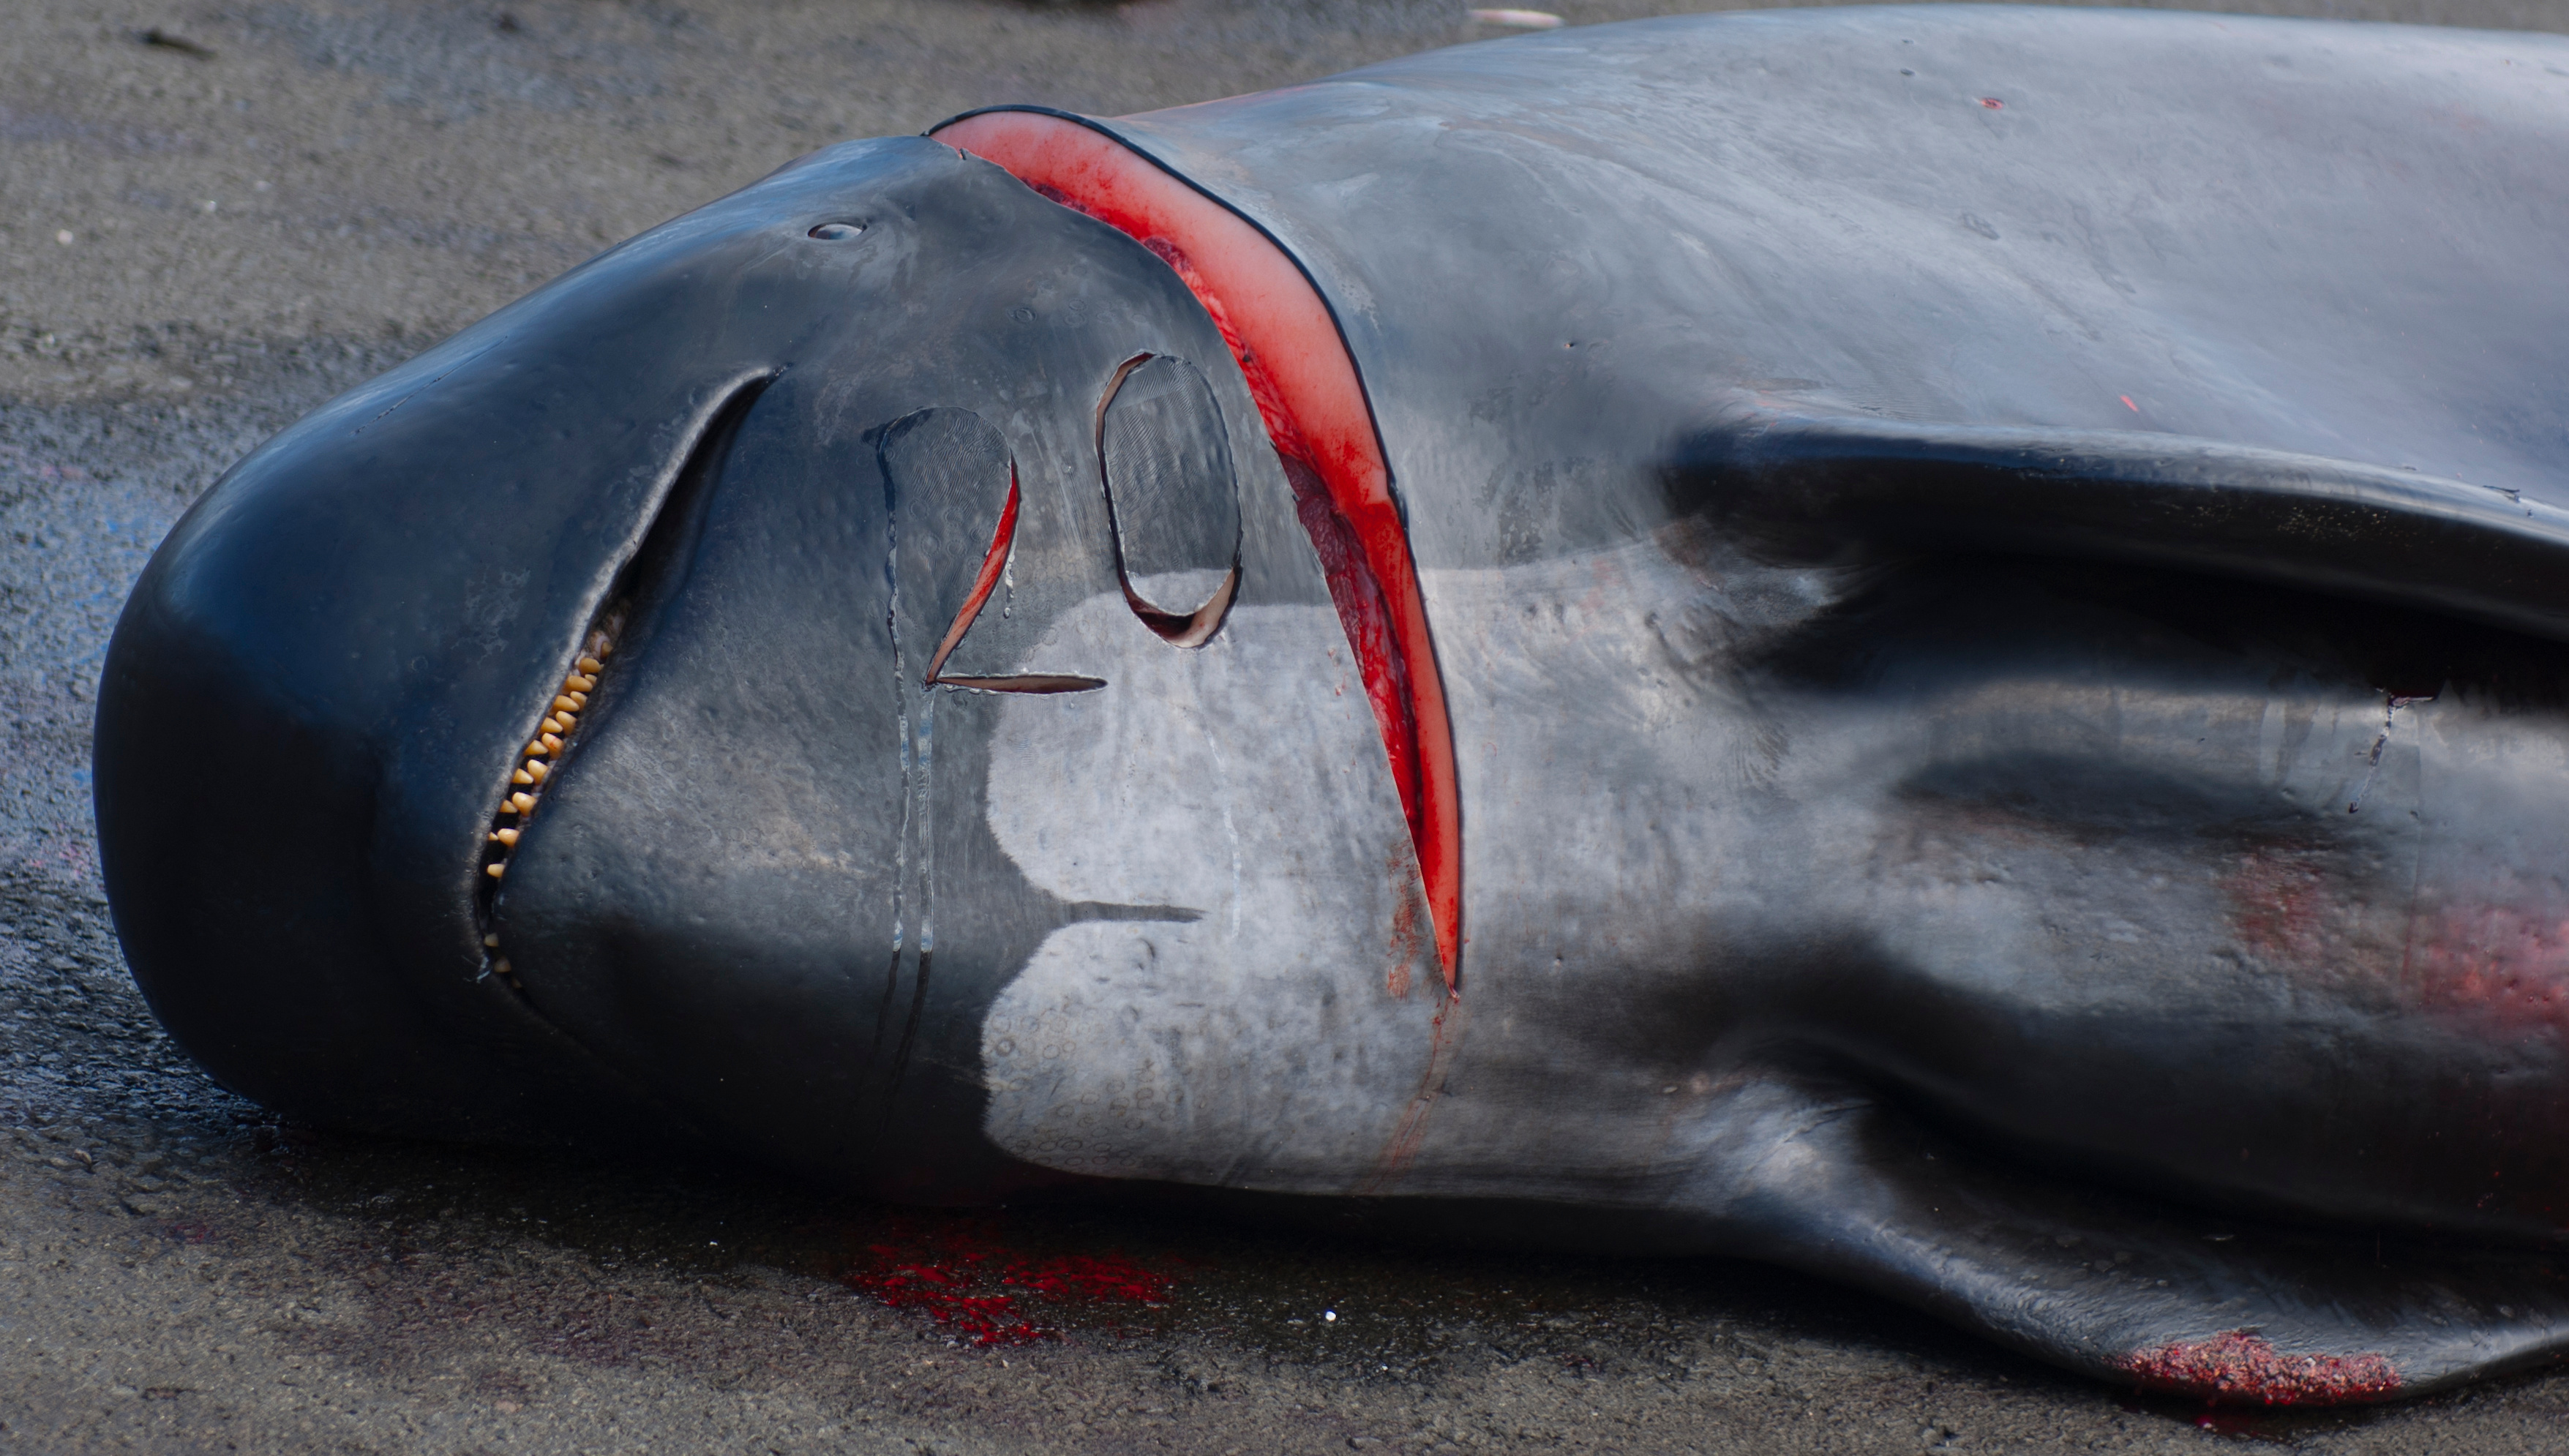 A pilot whale lies on the dock waiting to be butchered; the number 20 (recording the size in skinn of the whale) is carved on its neck.